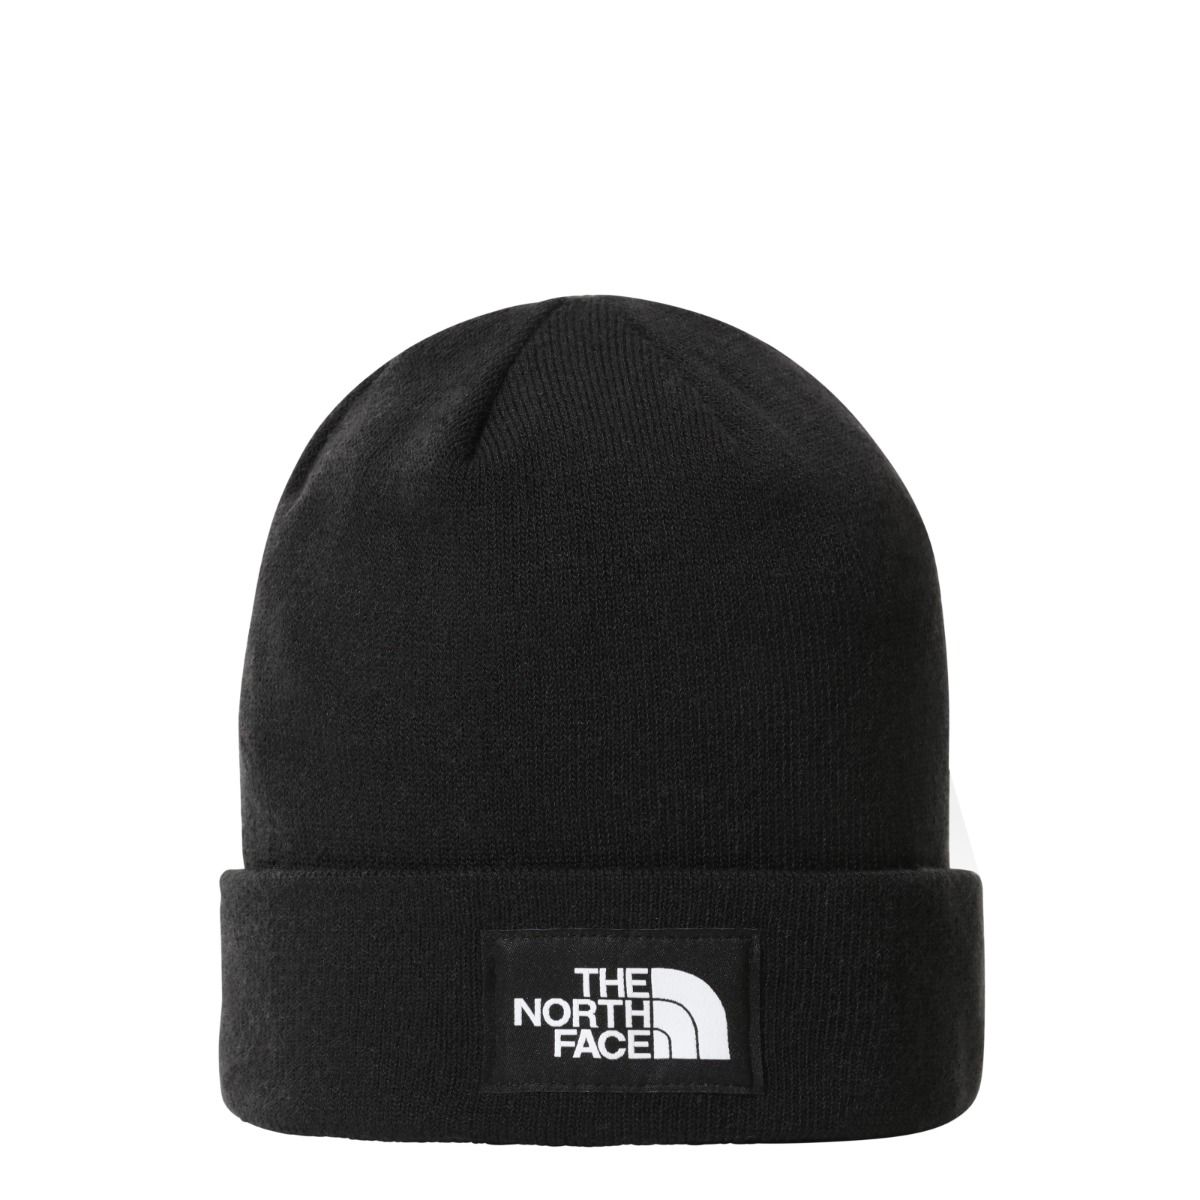 The North Face - DOCK WORKER RECYCLED BEANIE